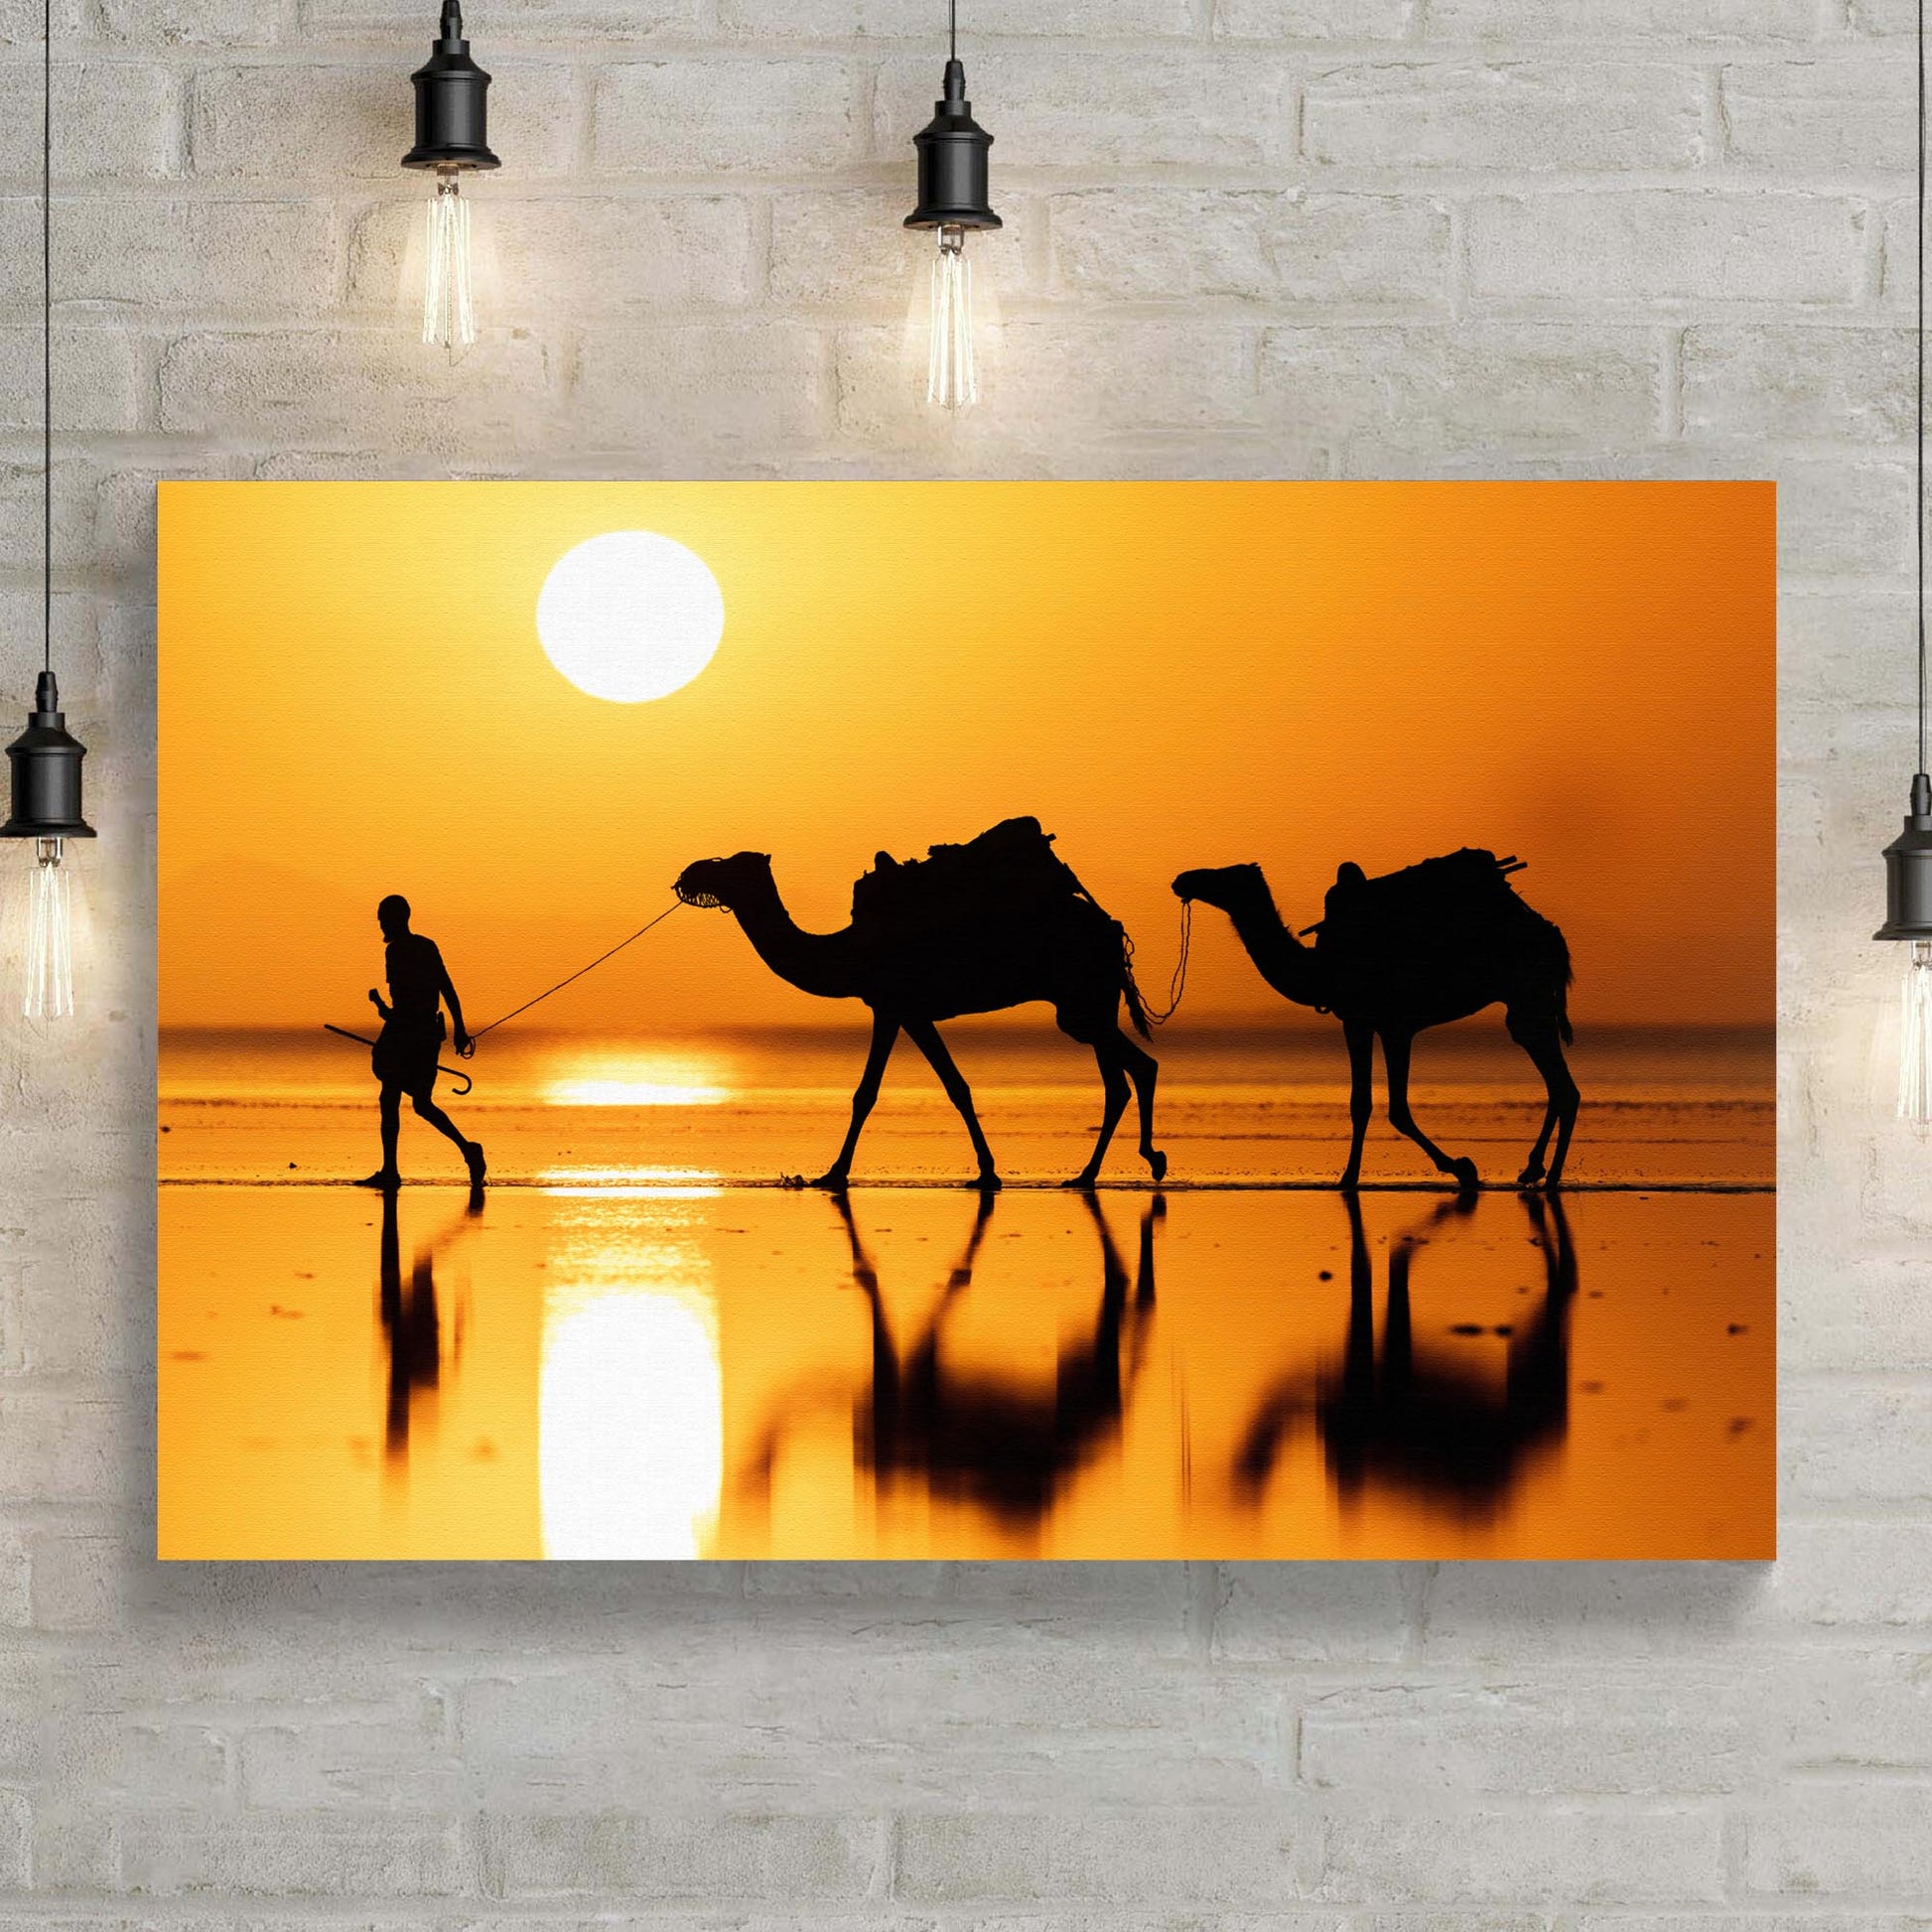 Sunset Camel Trail Canvas Wall Art - Image by Tailored Canvases